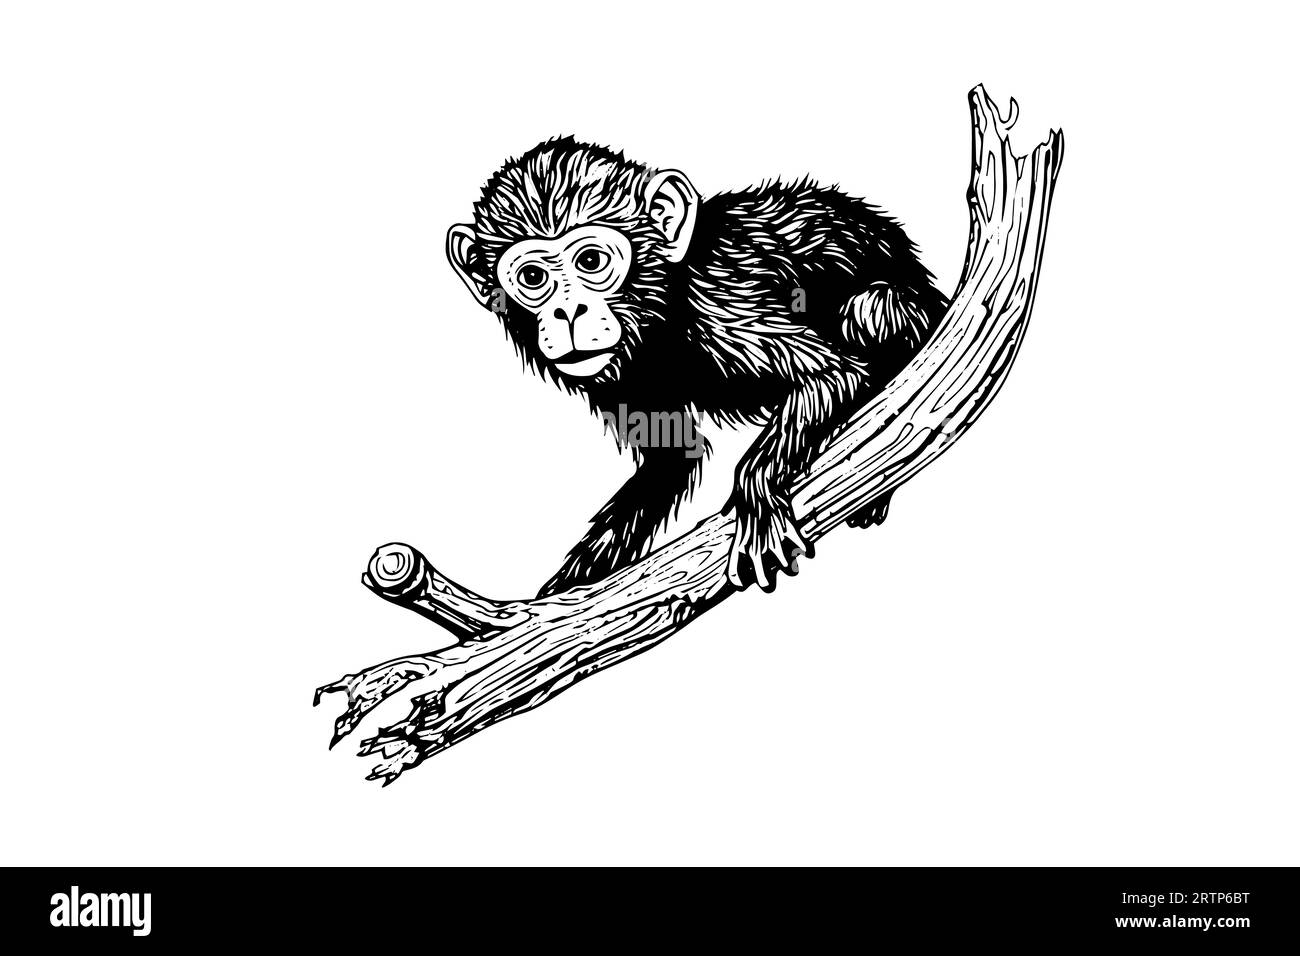 Monkey sitting on a branch. Ink sketch engraving vector illustration. Stock Vector